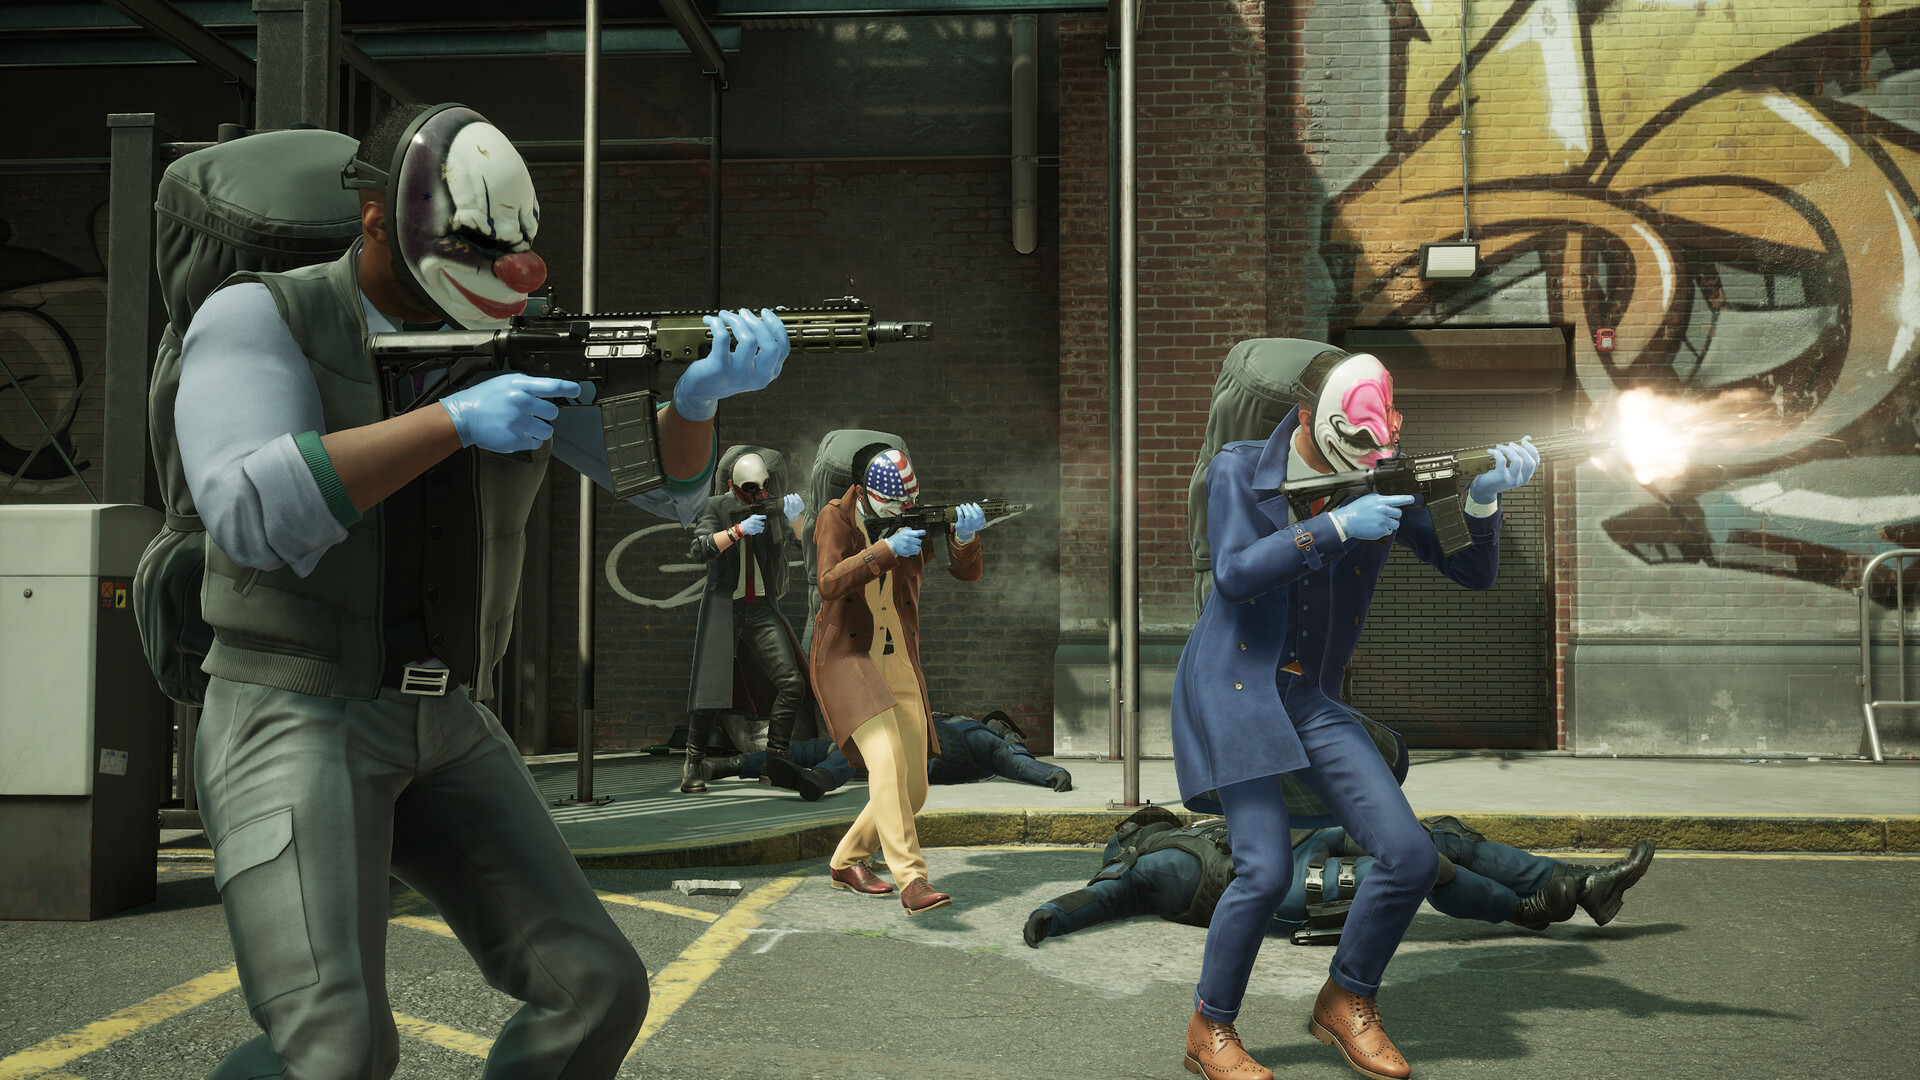 Download PAYDAY 3